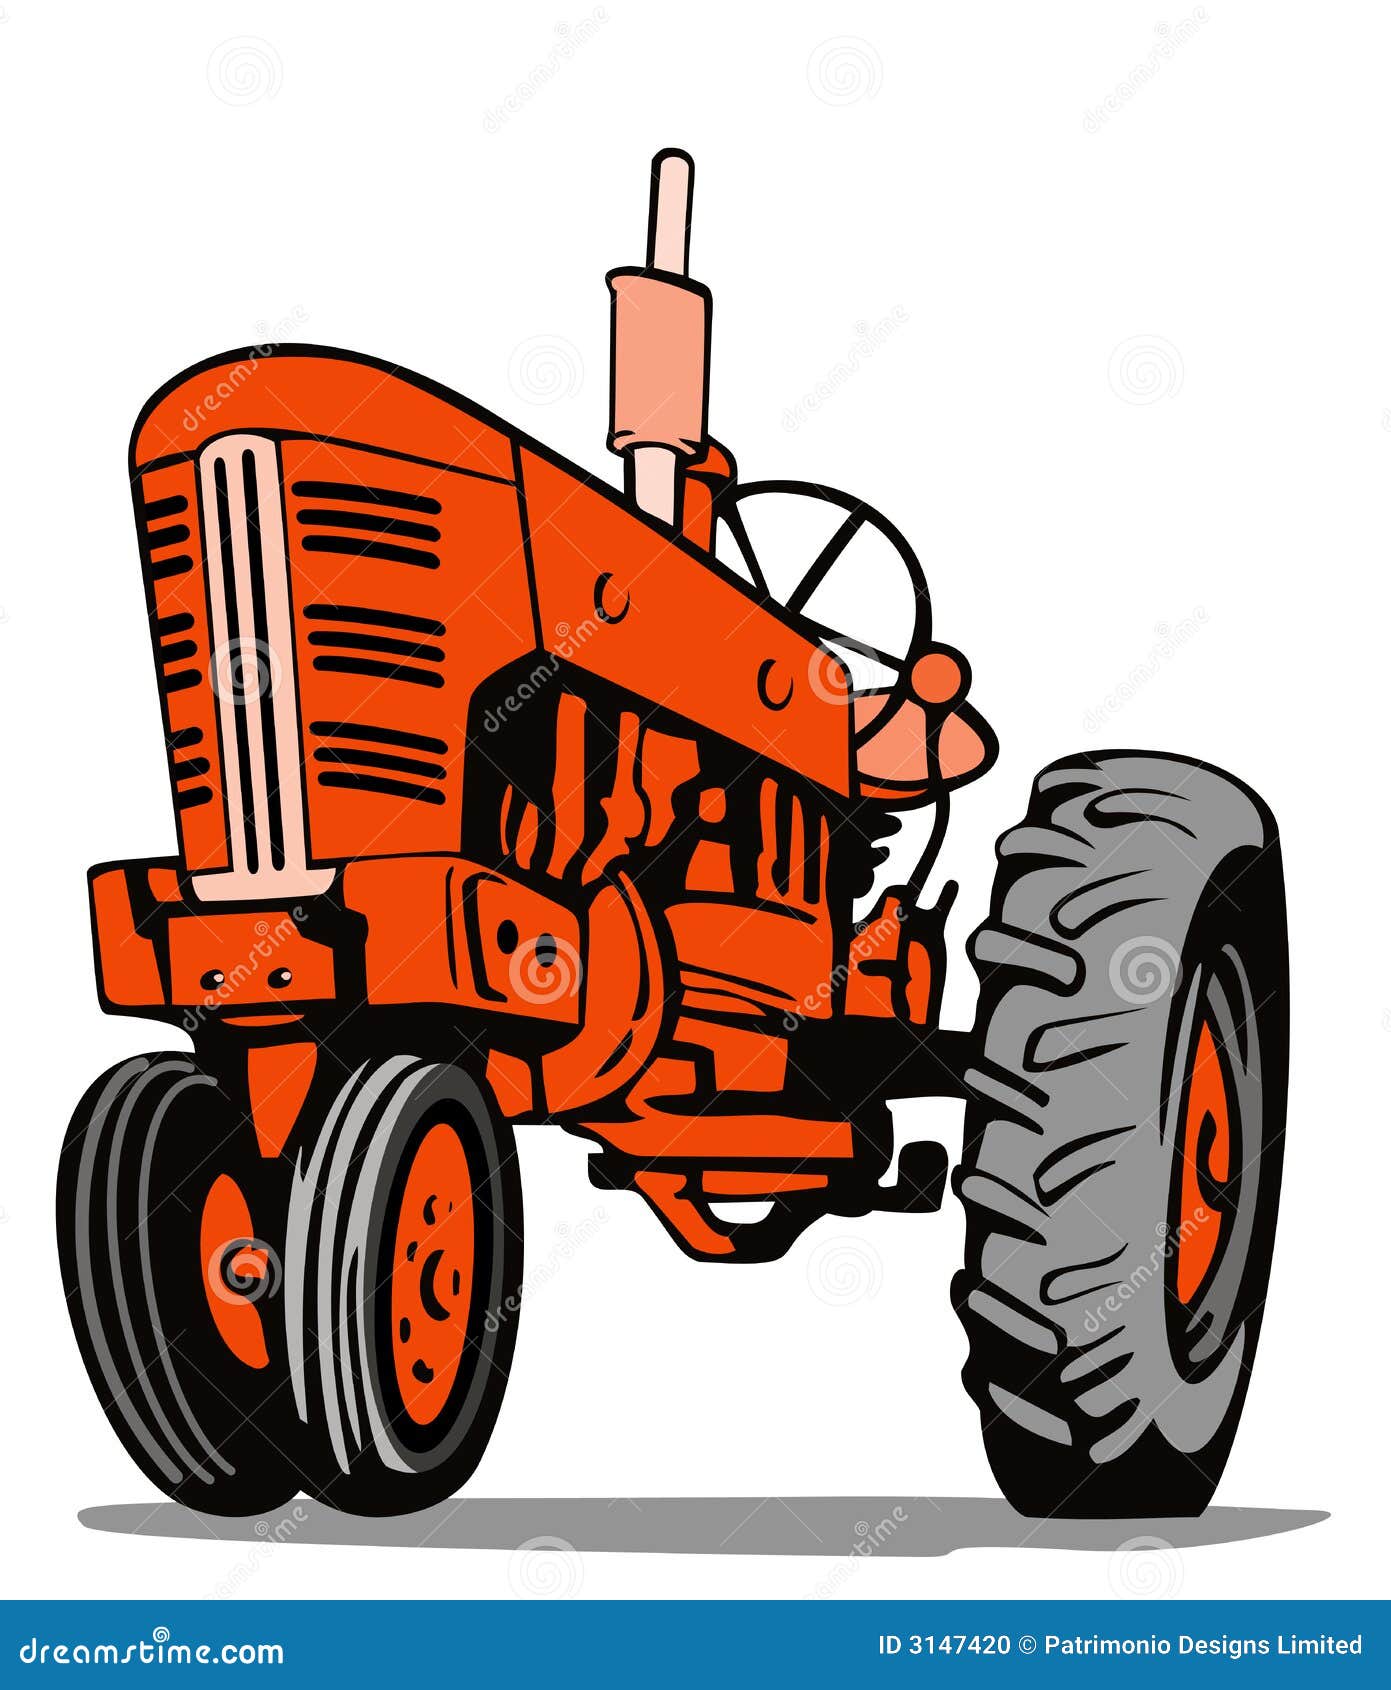 vintage tractor clipart - photo #20